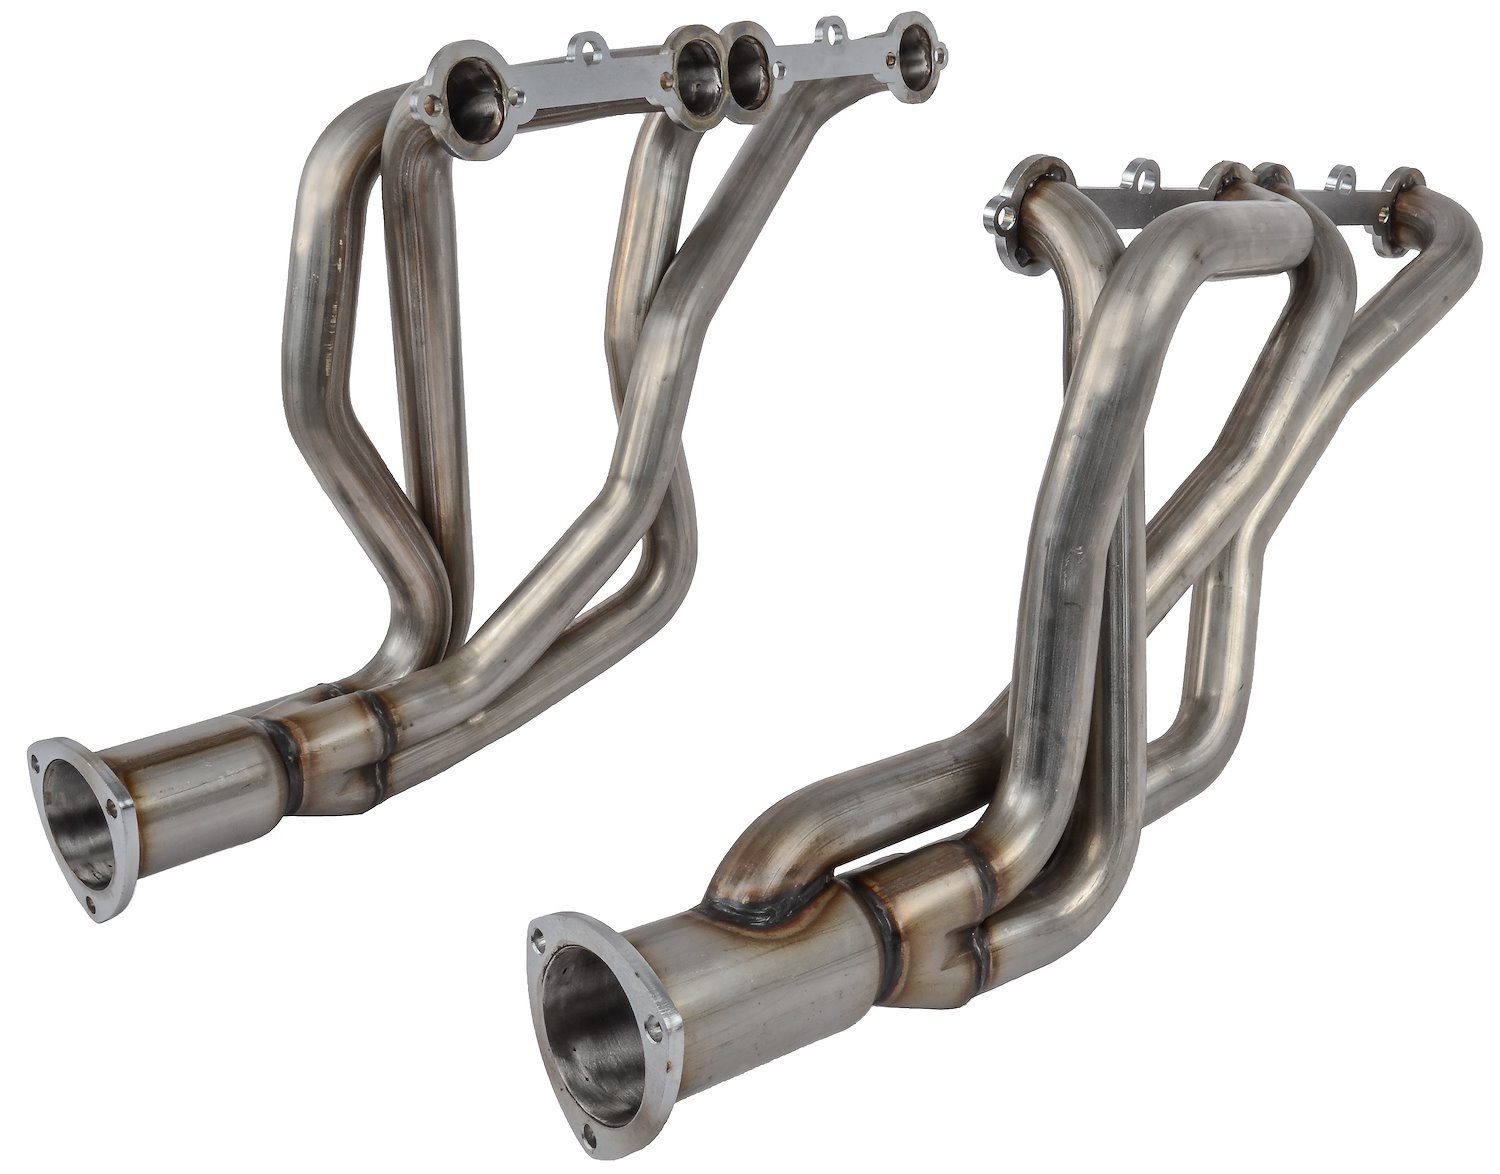 Stainless Steel Long Tube Headers for 1973-1991 GM Truck with Small Block Chevy 265-400 ci